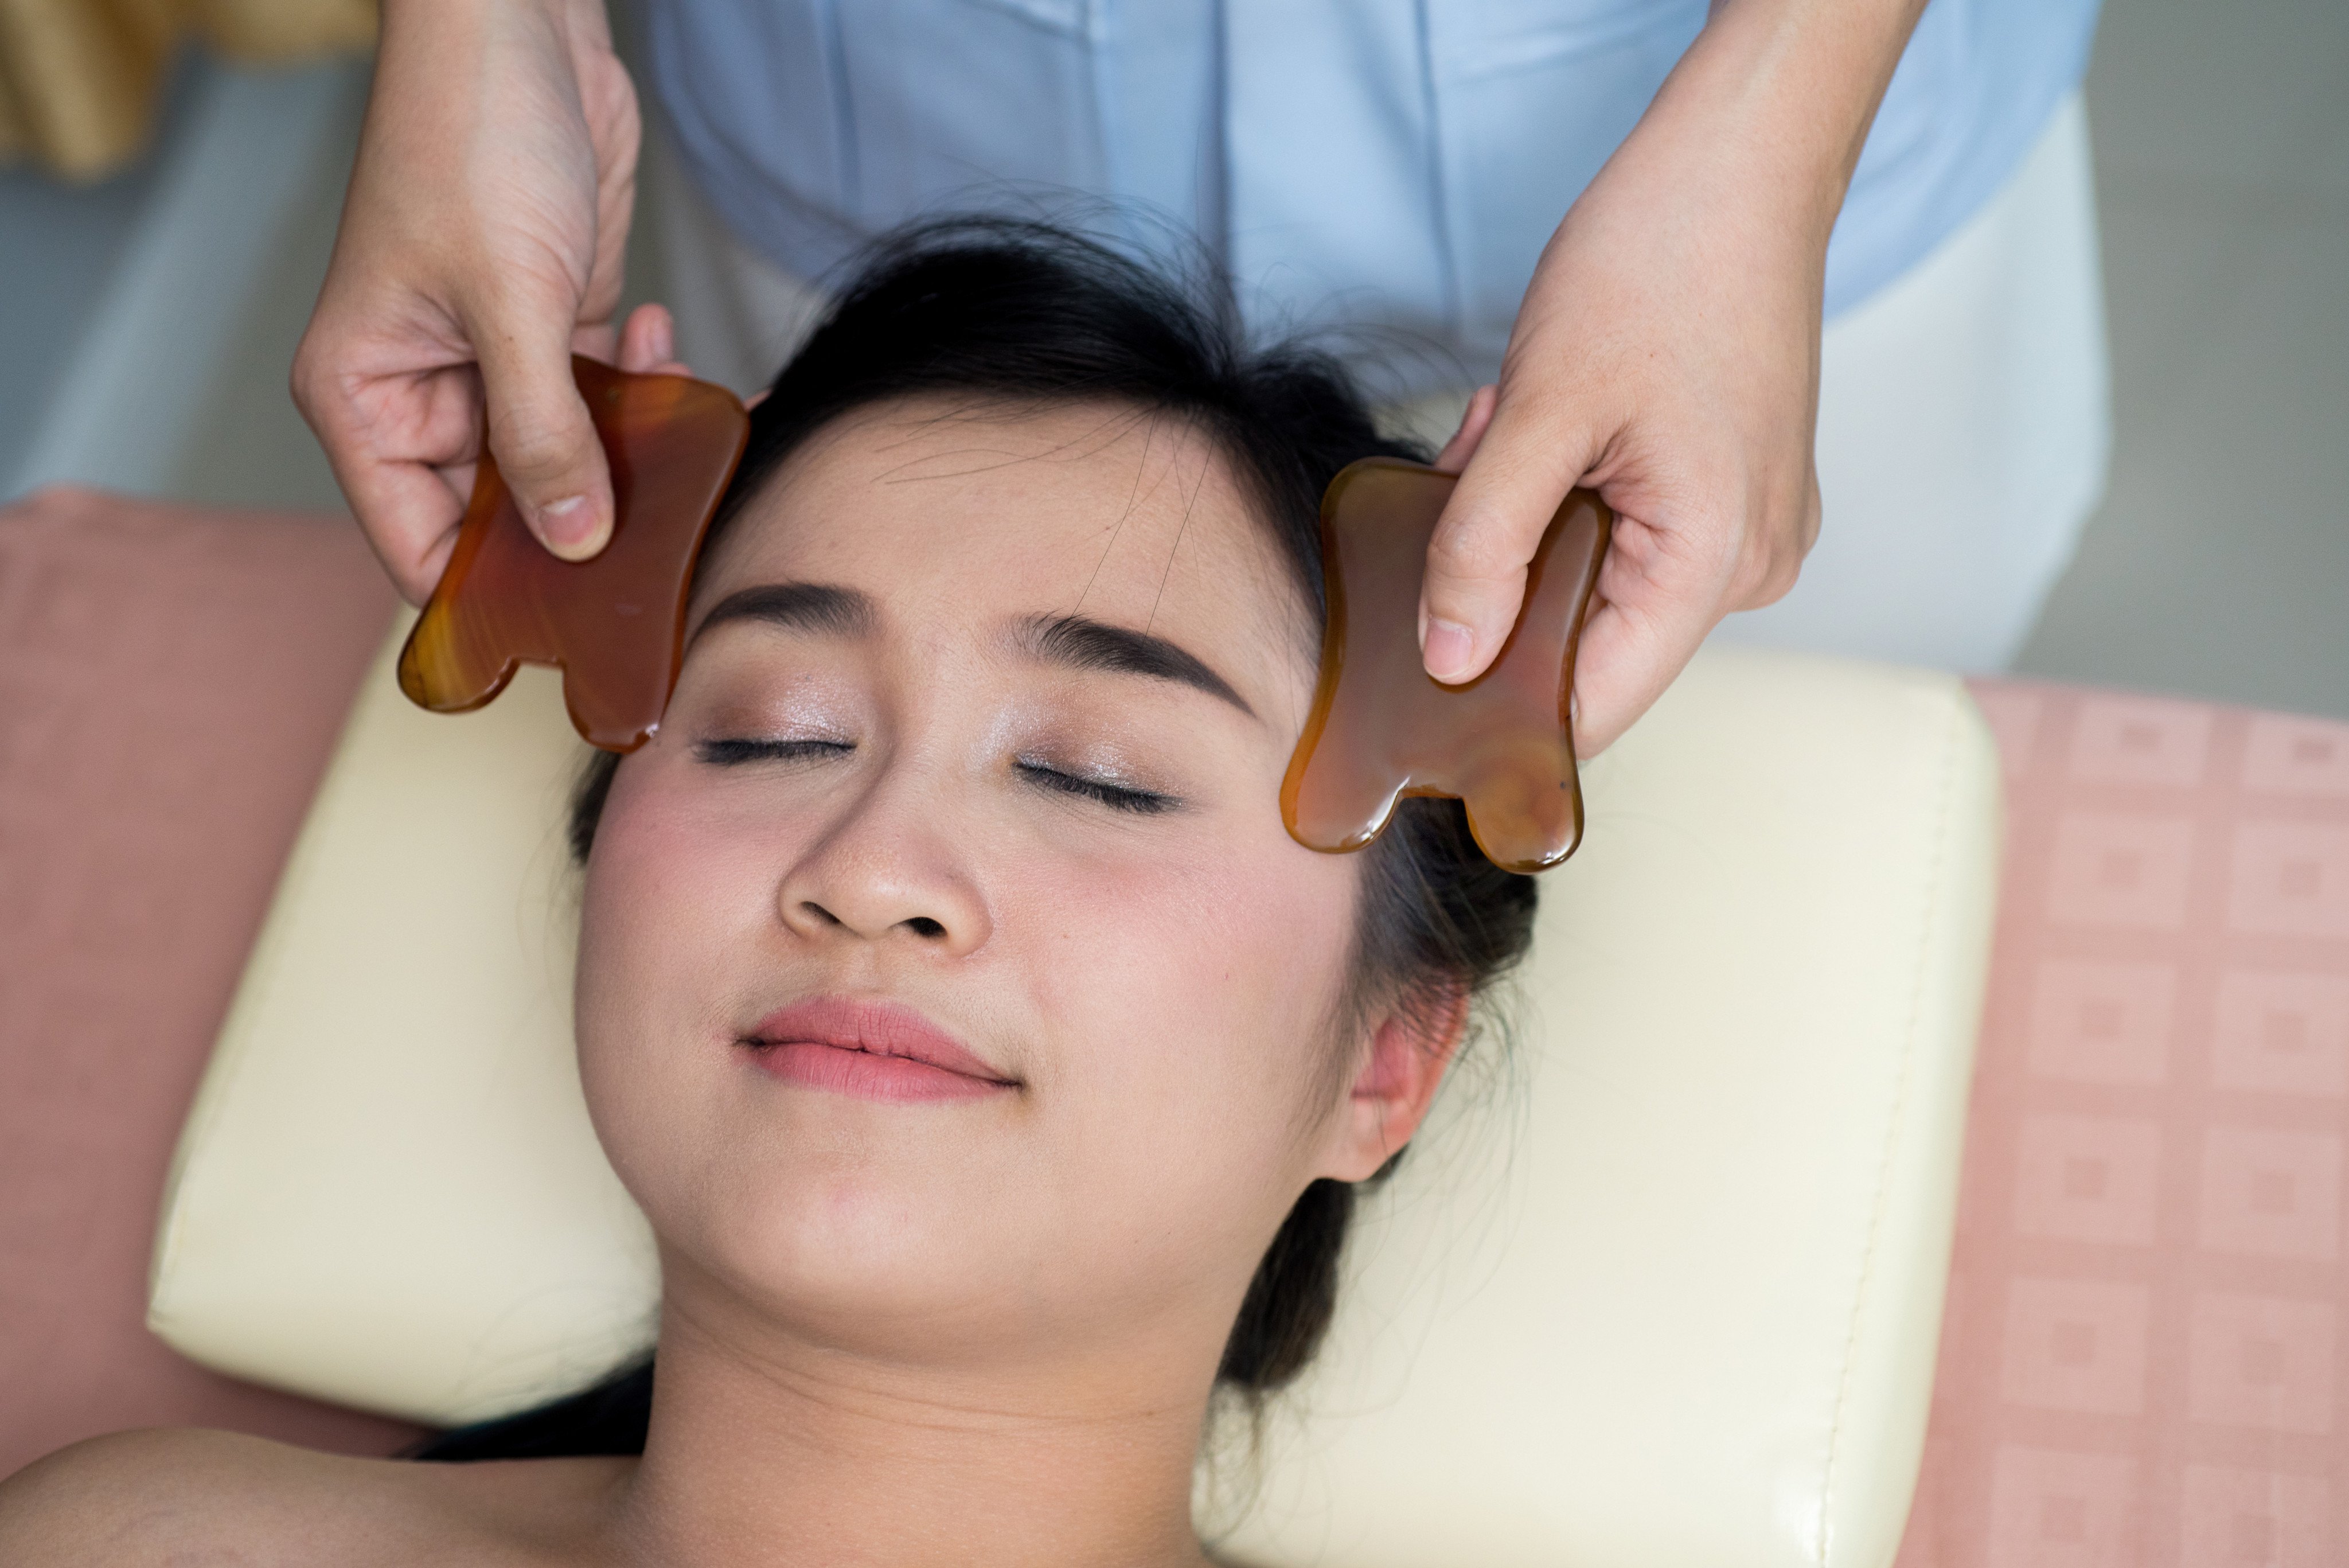 Gua sha, a traditional Chinese massage technique, is associated with lymphatic drainage, among other benefits. Photo: Shutterstock